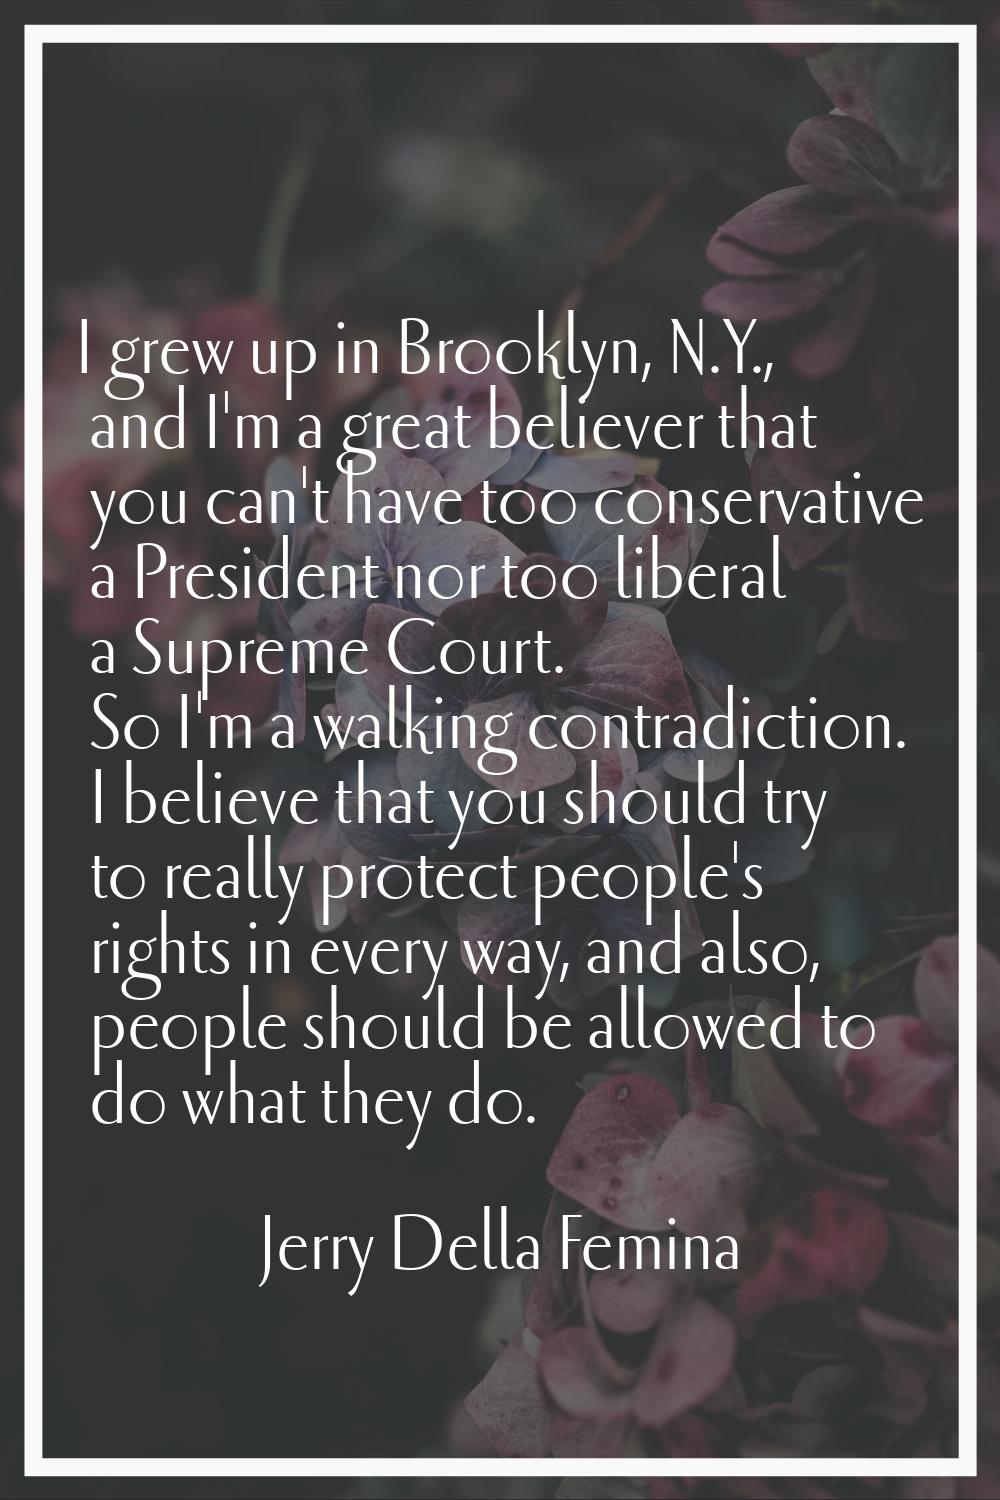 I grew up in Brooklyn, N.Y., and I'm a great believer that you can't have too conservative a Presid